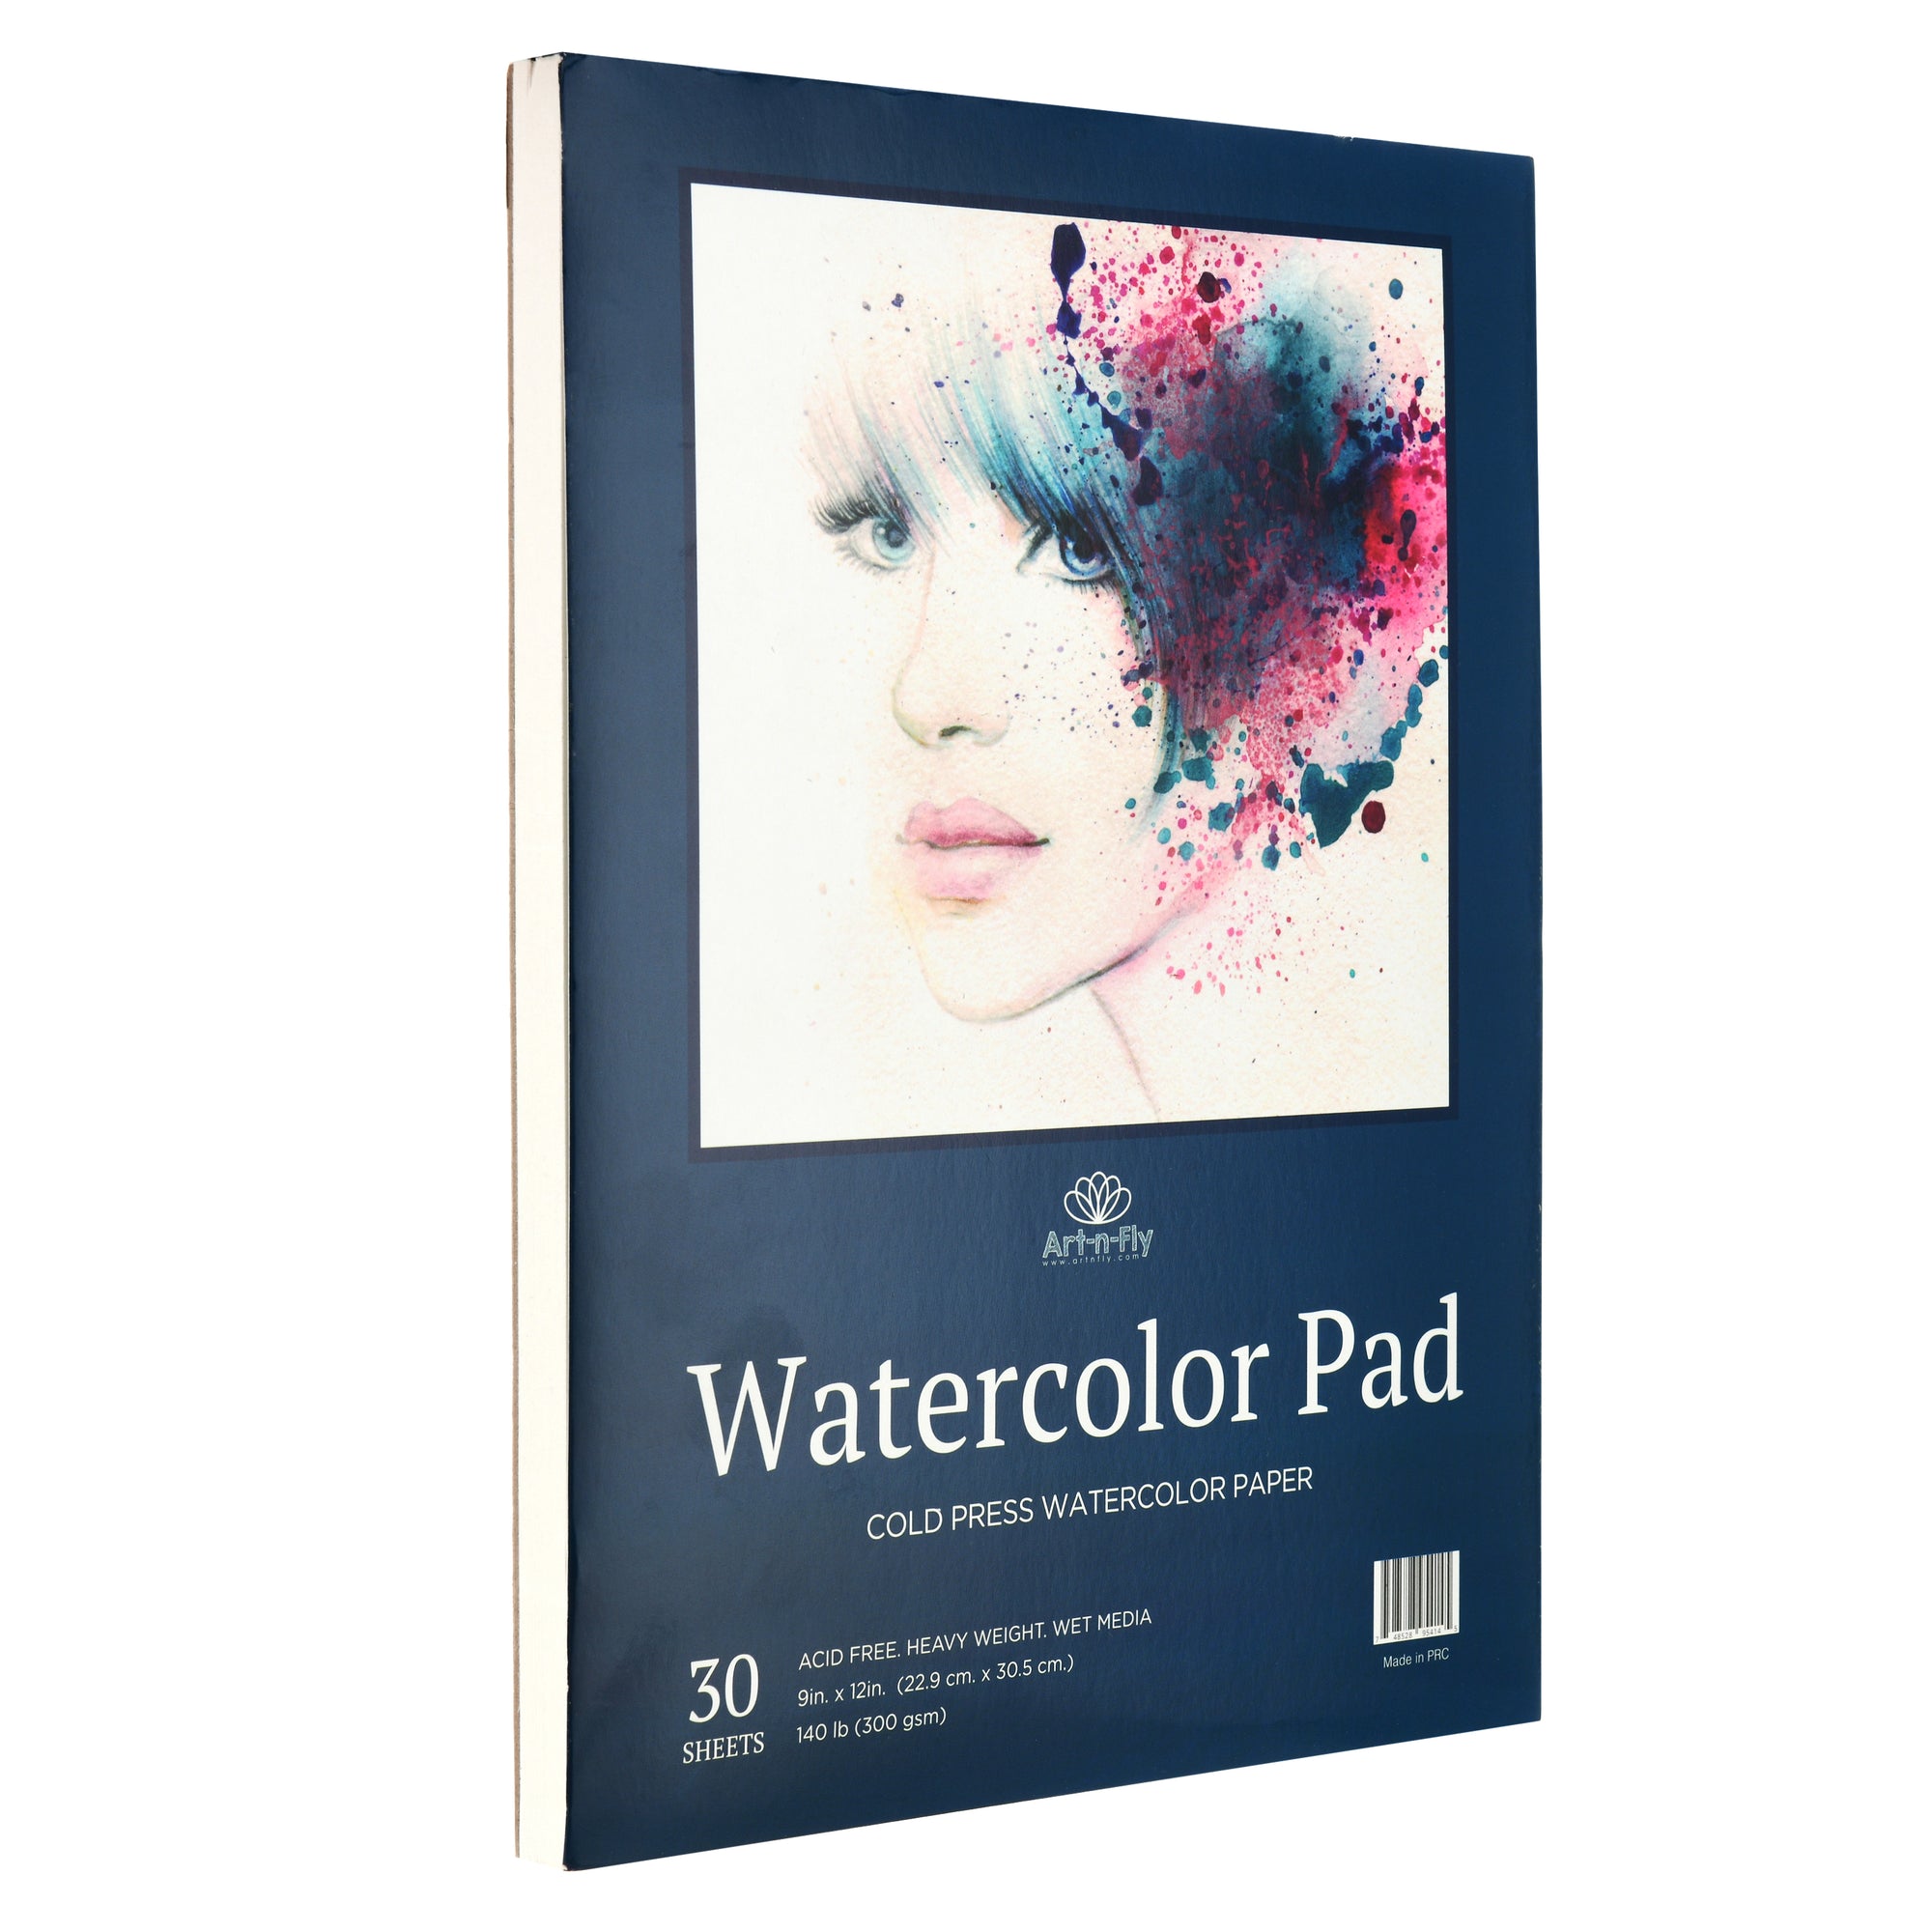 Watercolor Paper Bulk 140lb300gsm 5x7 inches 30 Sheets Painting Paper Art  Sup